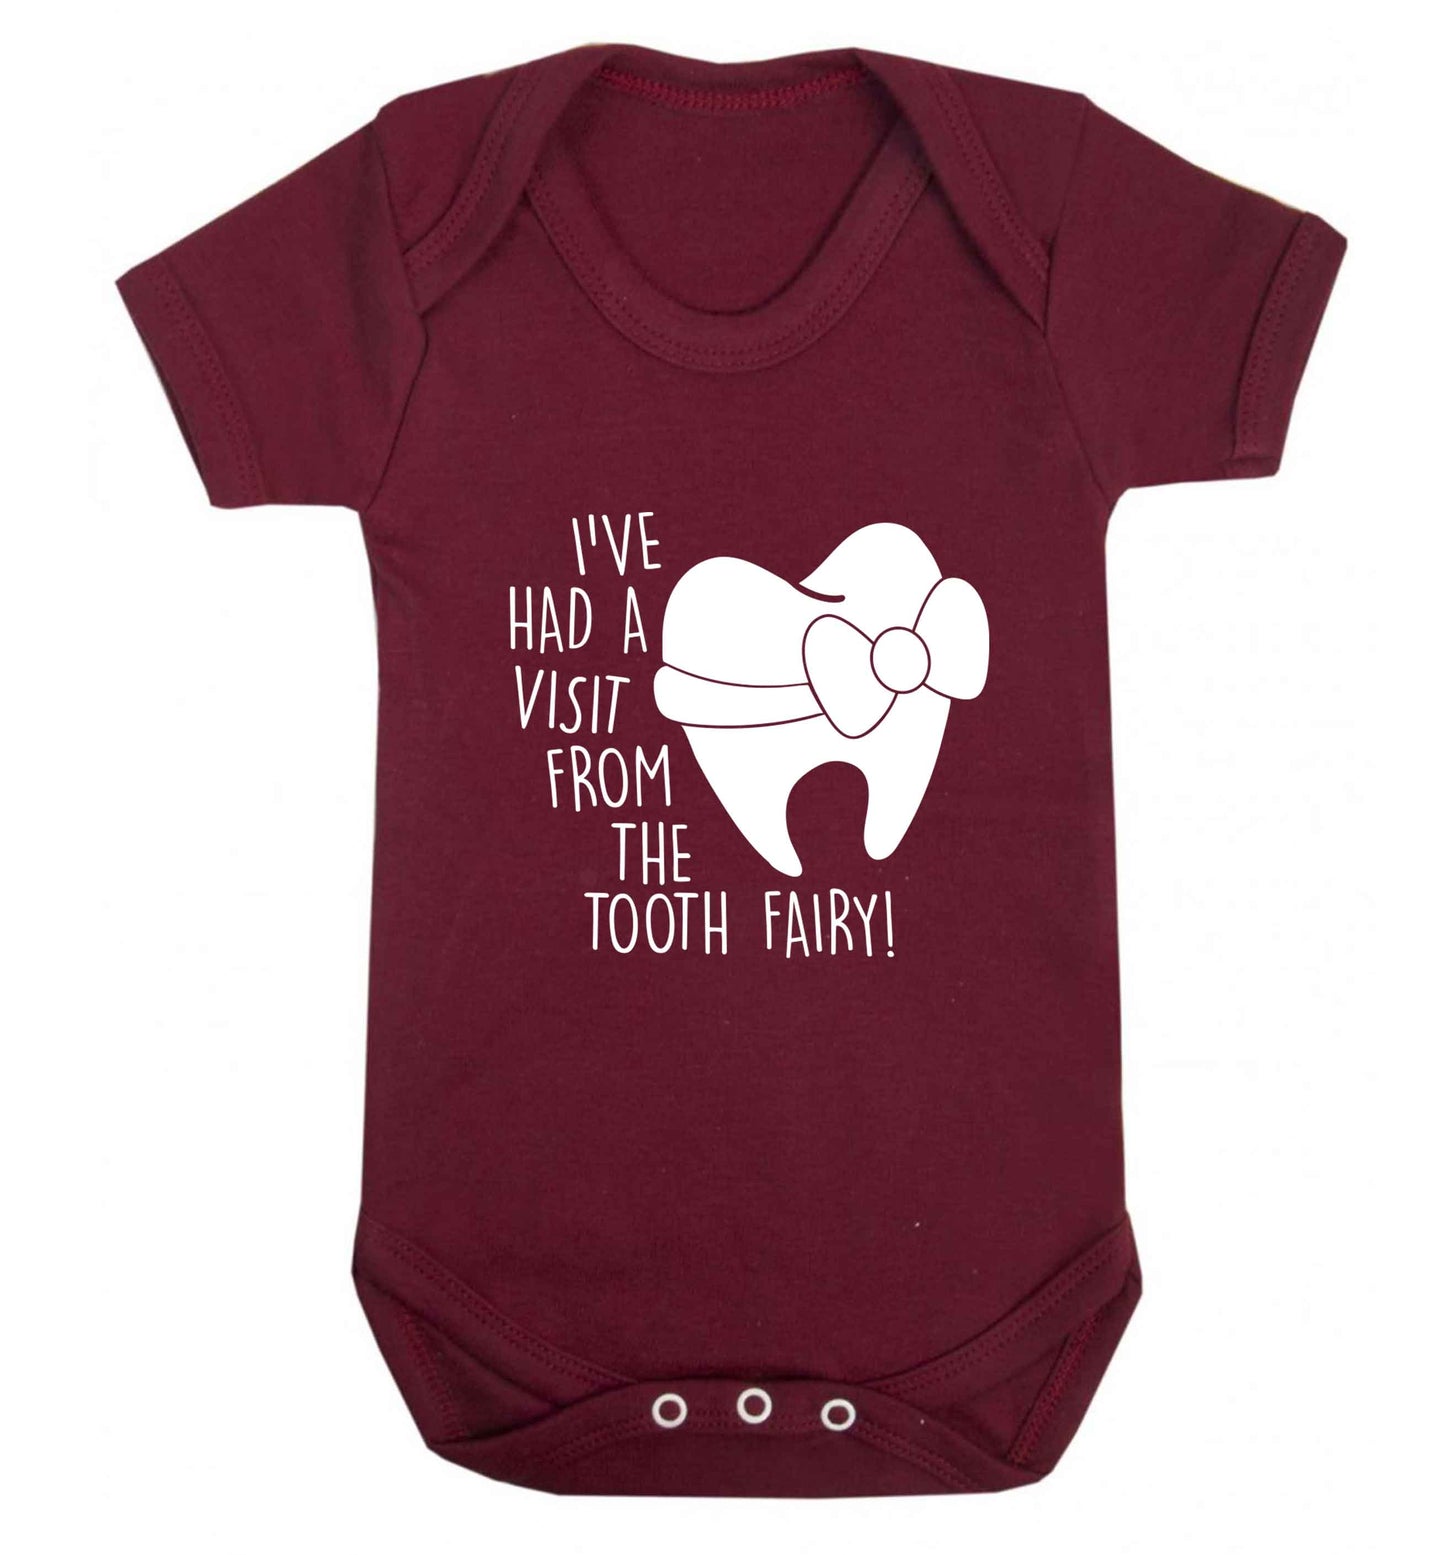 Visit From Tooth Fairy baby vest maroon 18-24 months